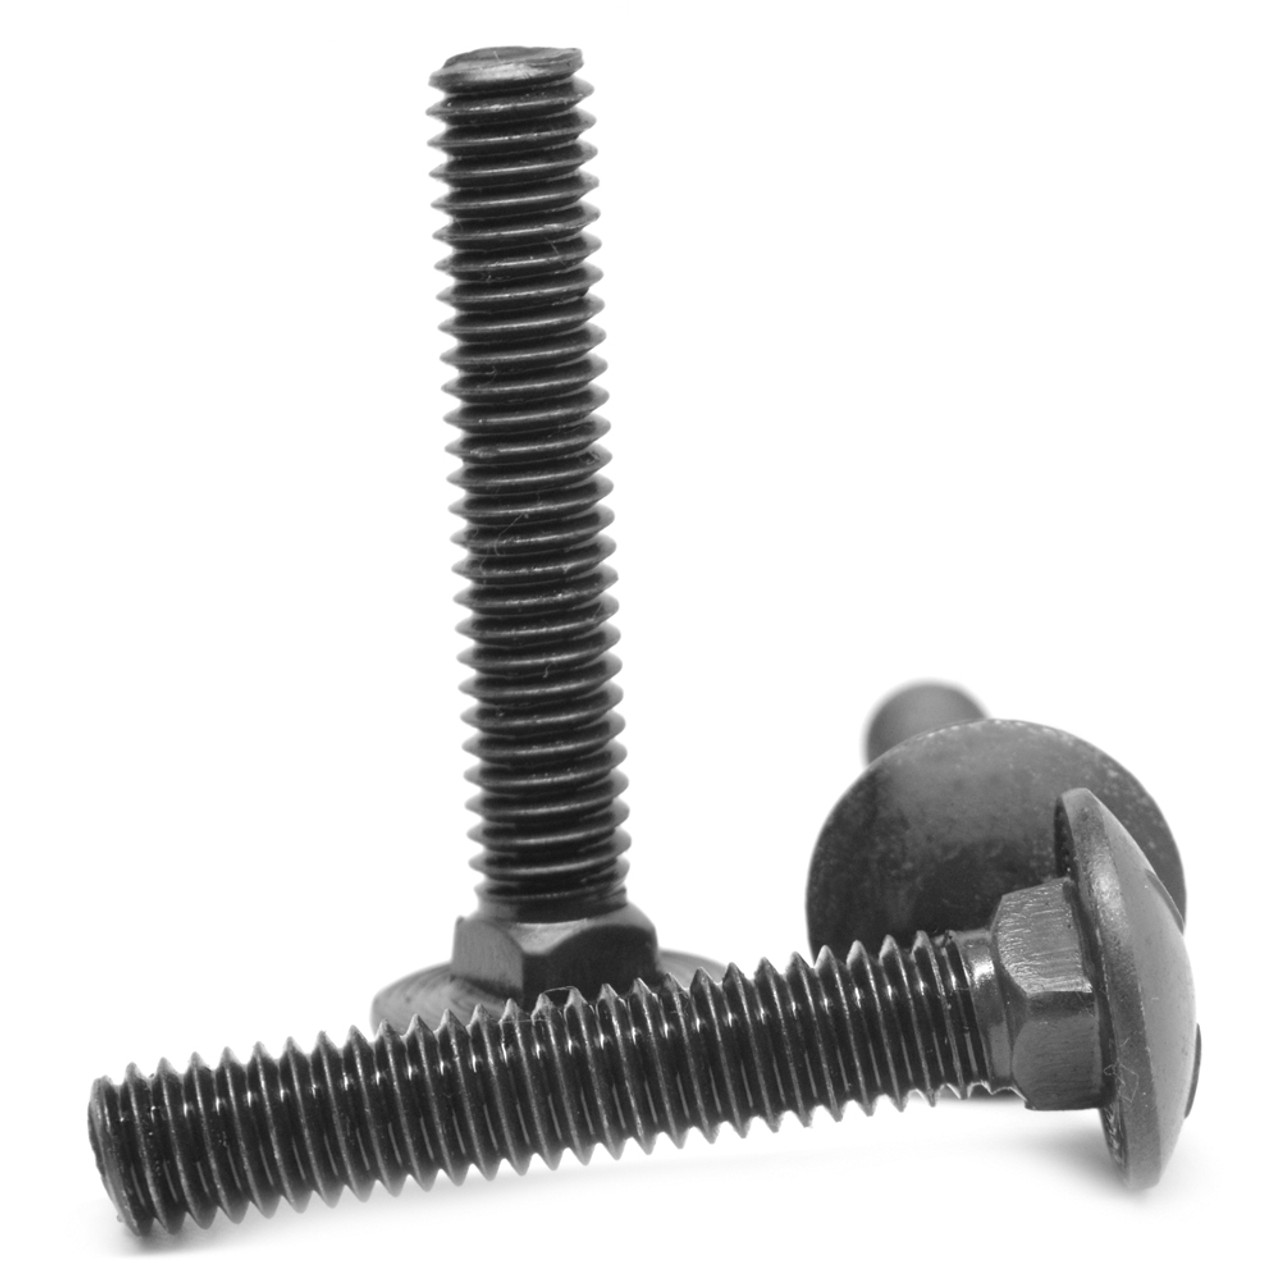 1/2-13 x 2 1/2 (FT) Coarse Thread Grade 8 Carriage Bolt Alloy Steel Thermal Black Oxide